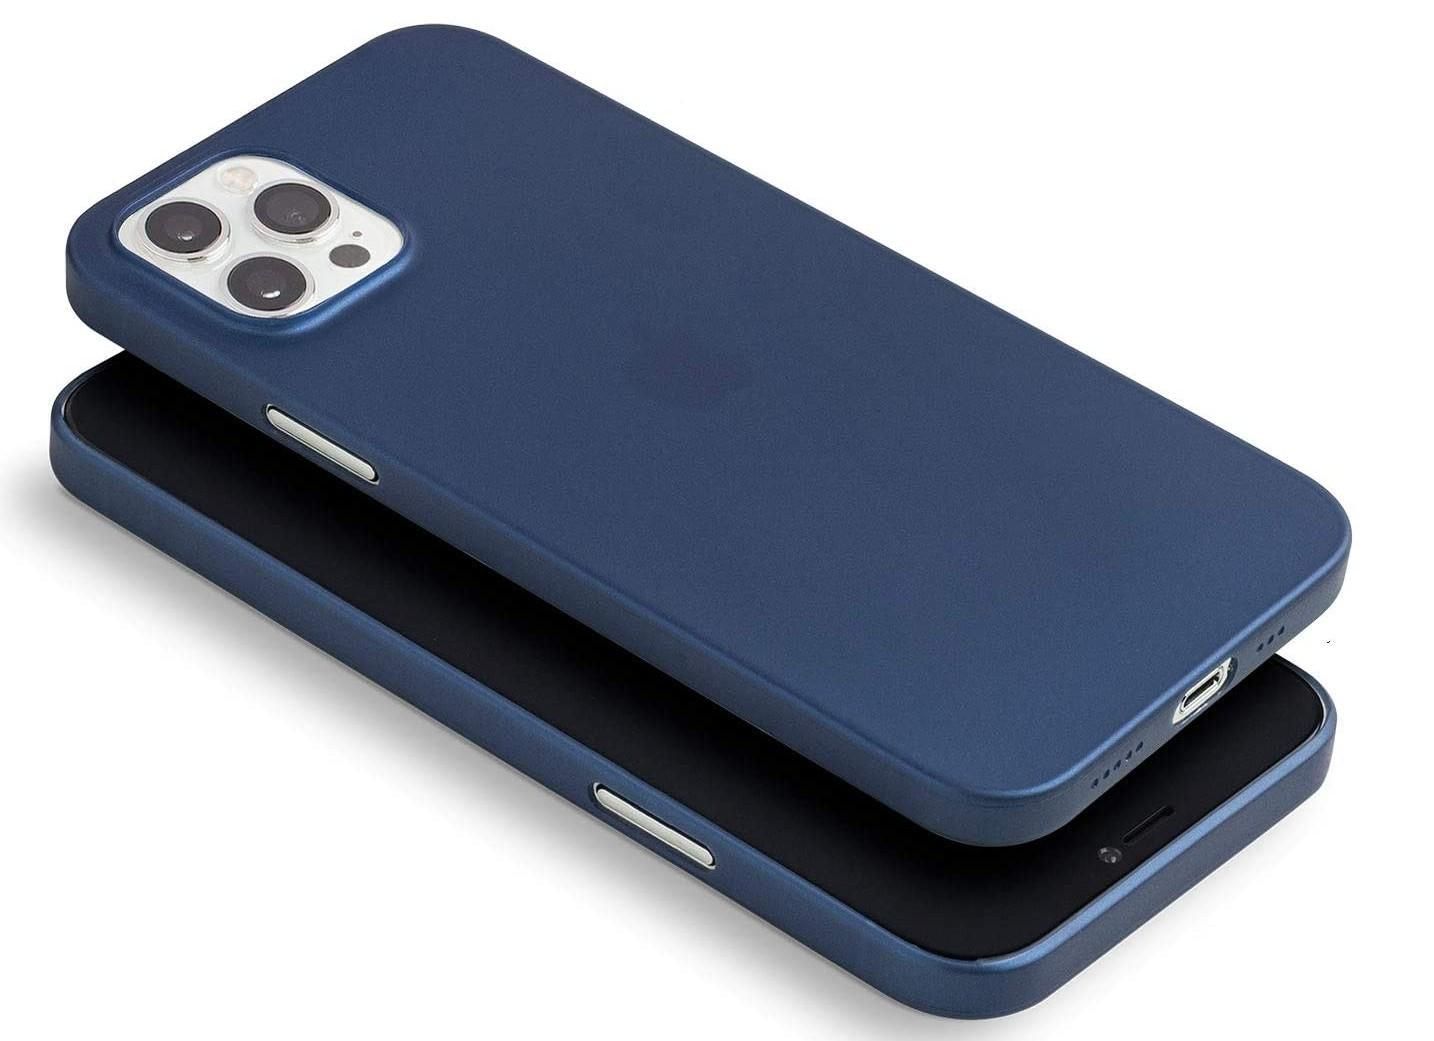 Totalle thin case for the iPhone 12 Pro